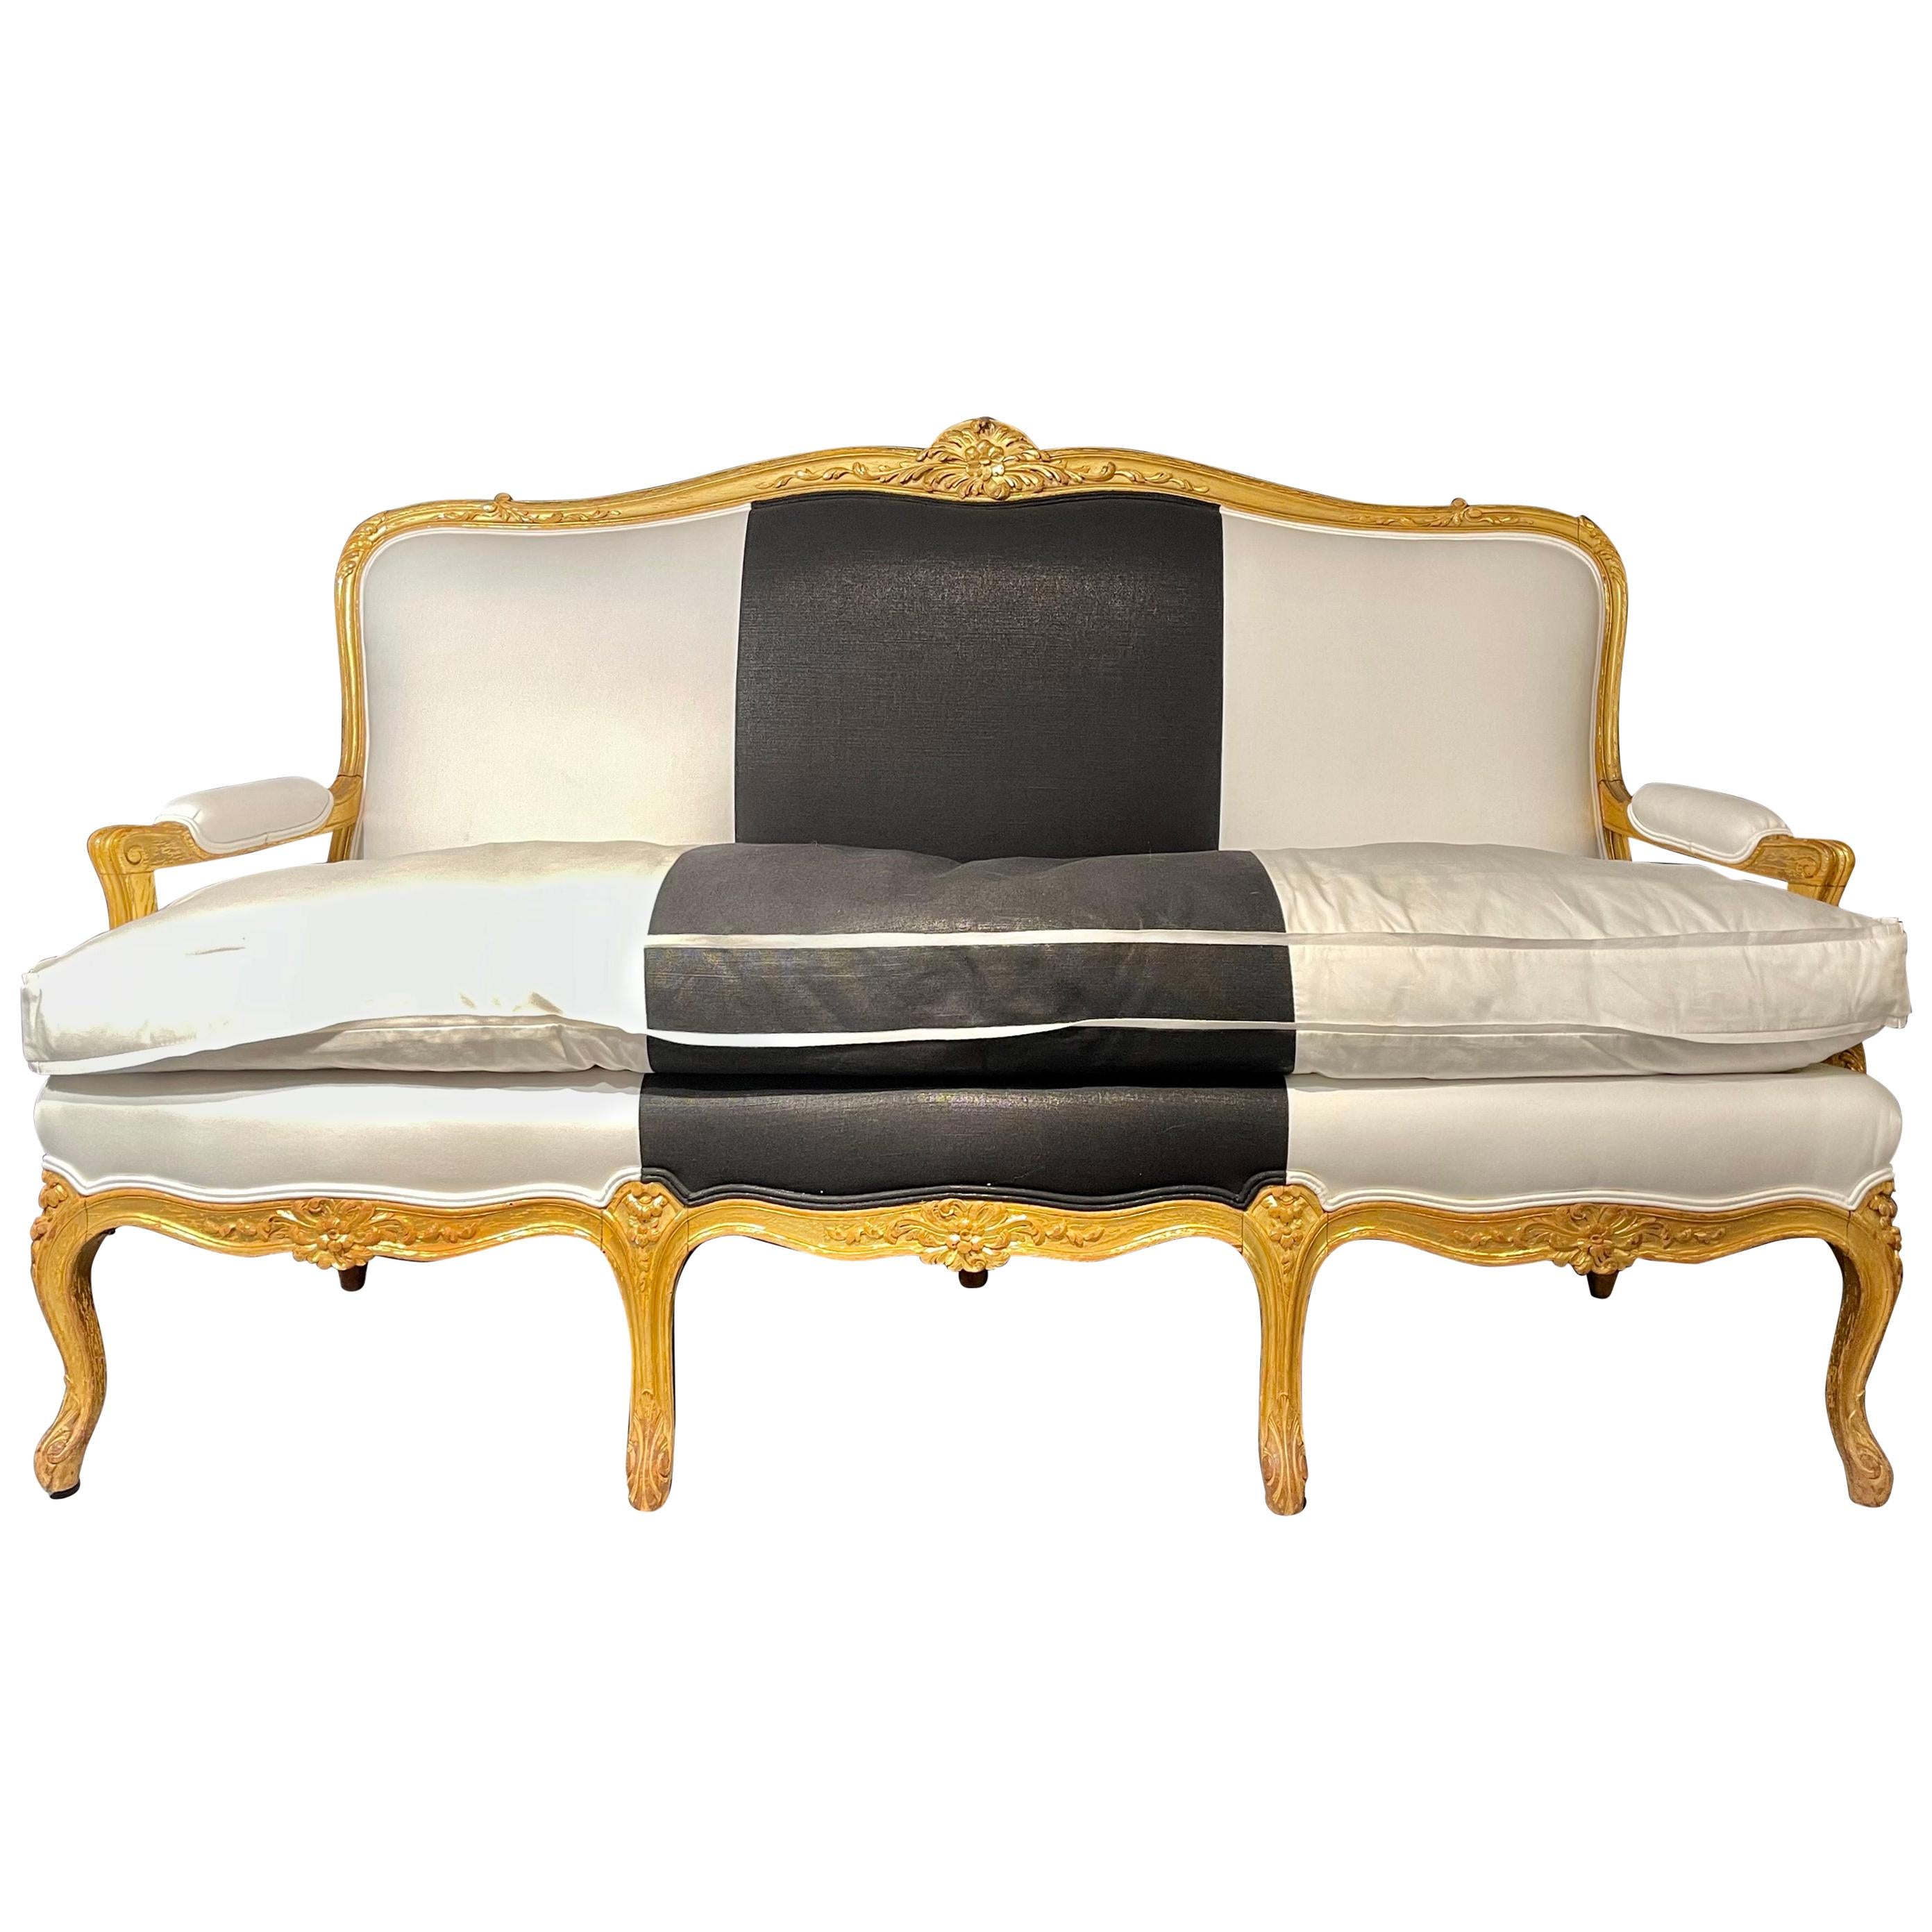 1920s French Settee, Sofa or Canape One of Two in Gilt Wood Polished Cotton For Sale